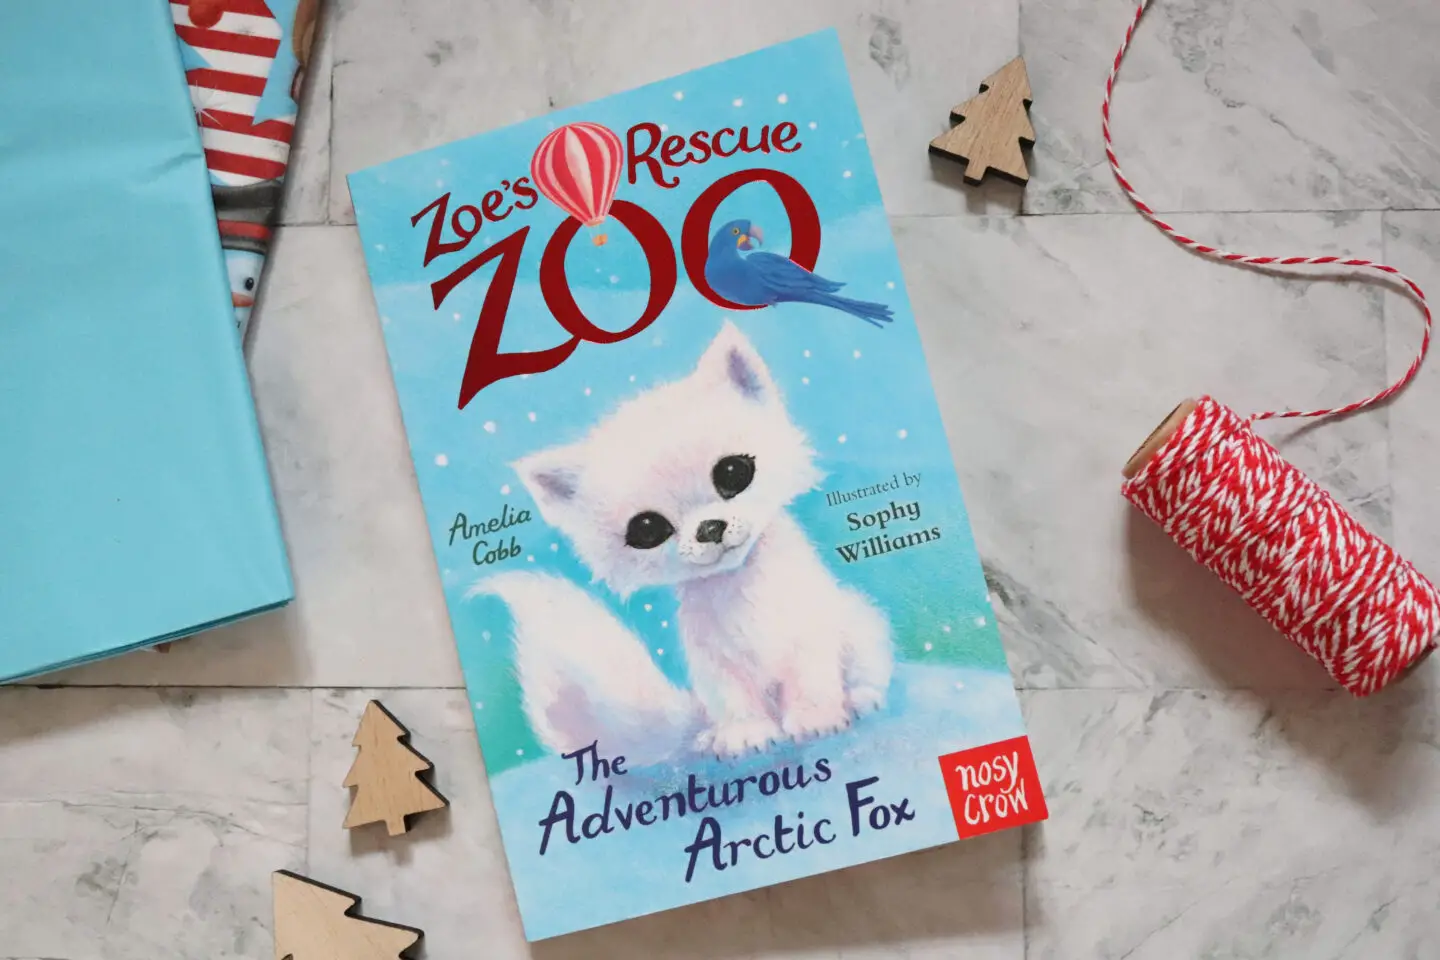 Zoes Rescue Zoo book